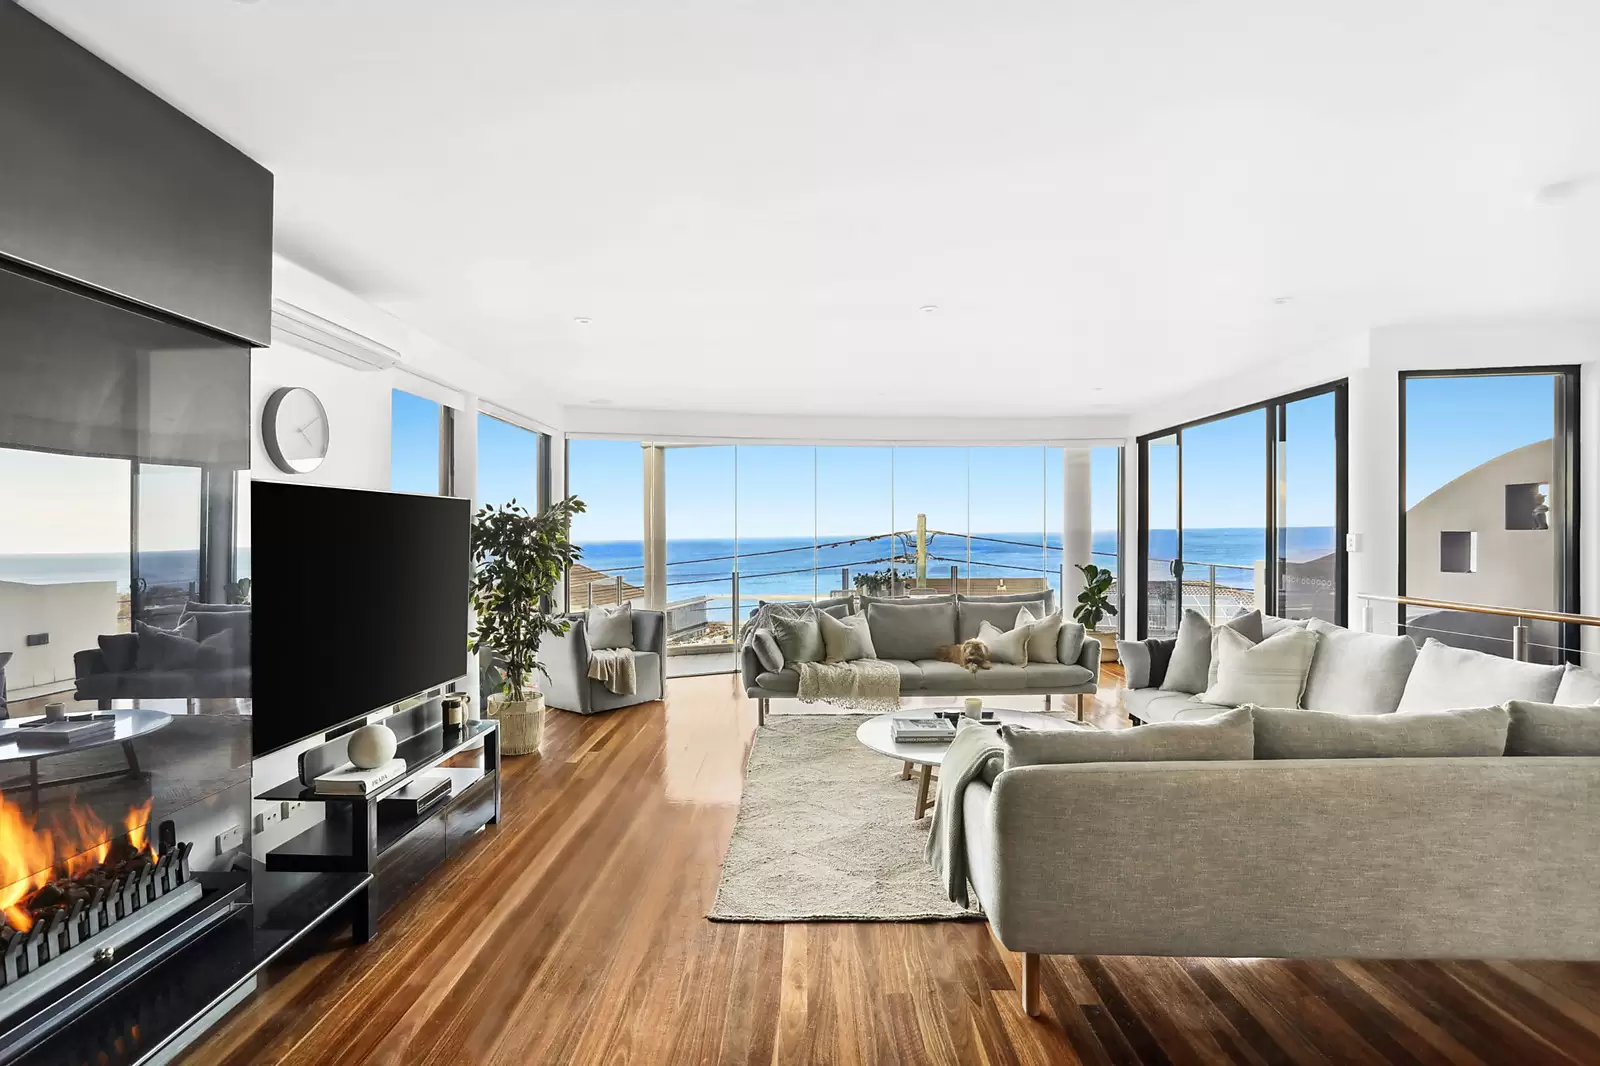 Photo #13: 68 Denning Street, South Coogee - Auction by Sydney Sotheby's International Realty